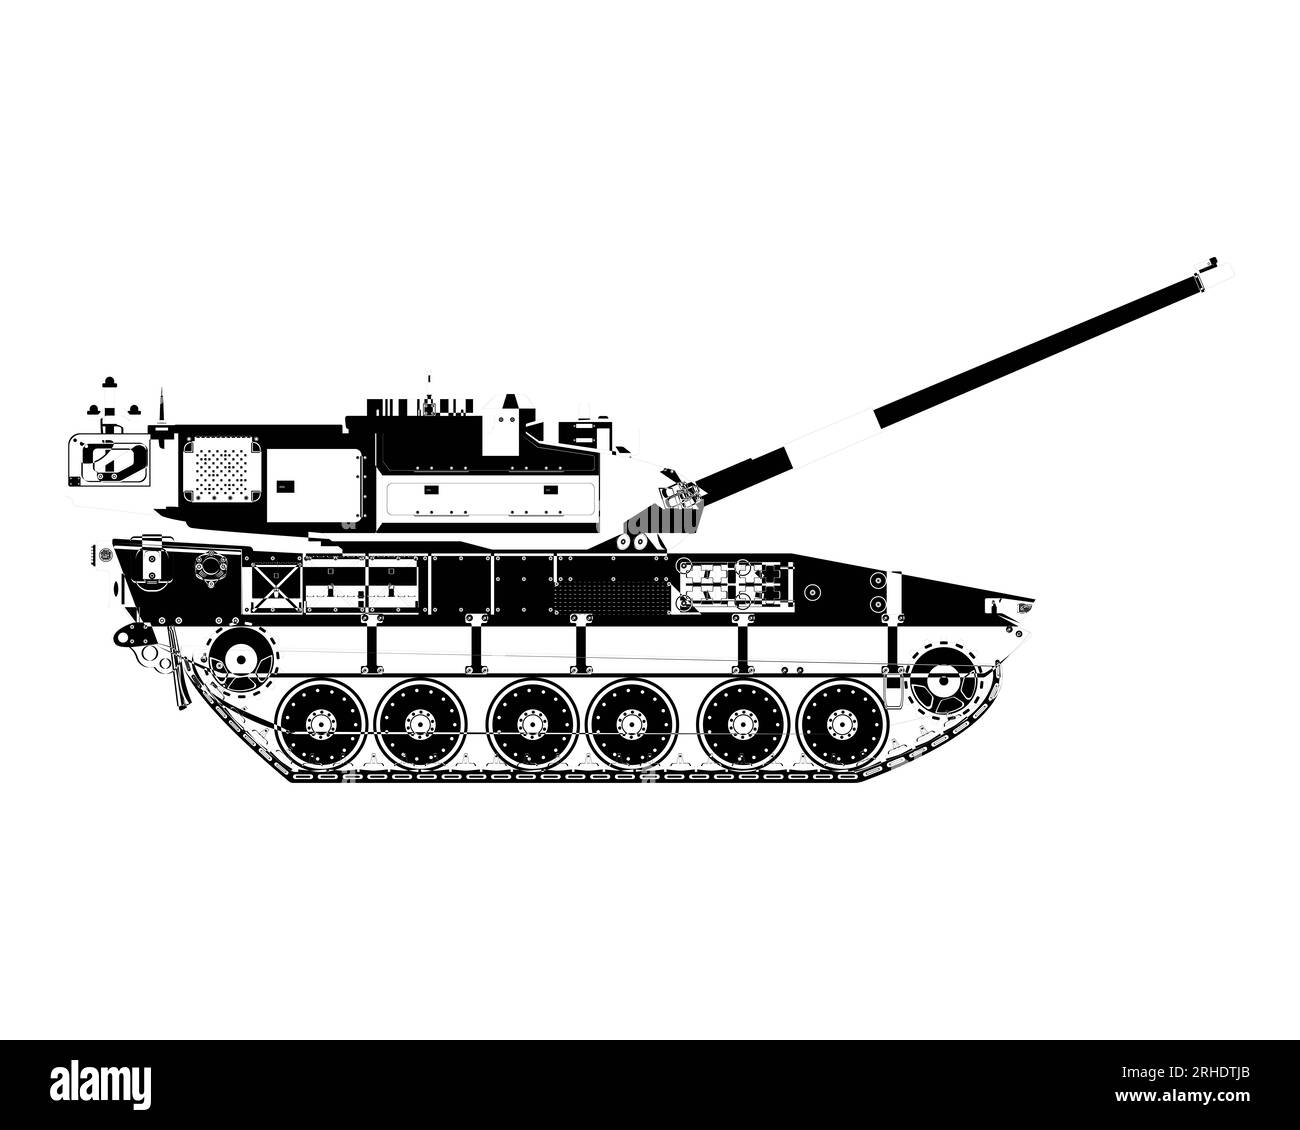 Main battle tank in abstract. Raised barrel. Armored military vehicle. Detailed illustration isolated on white background. Stock Photo